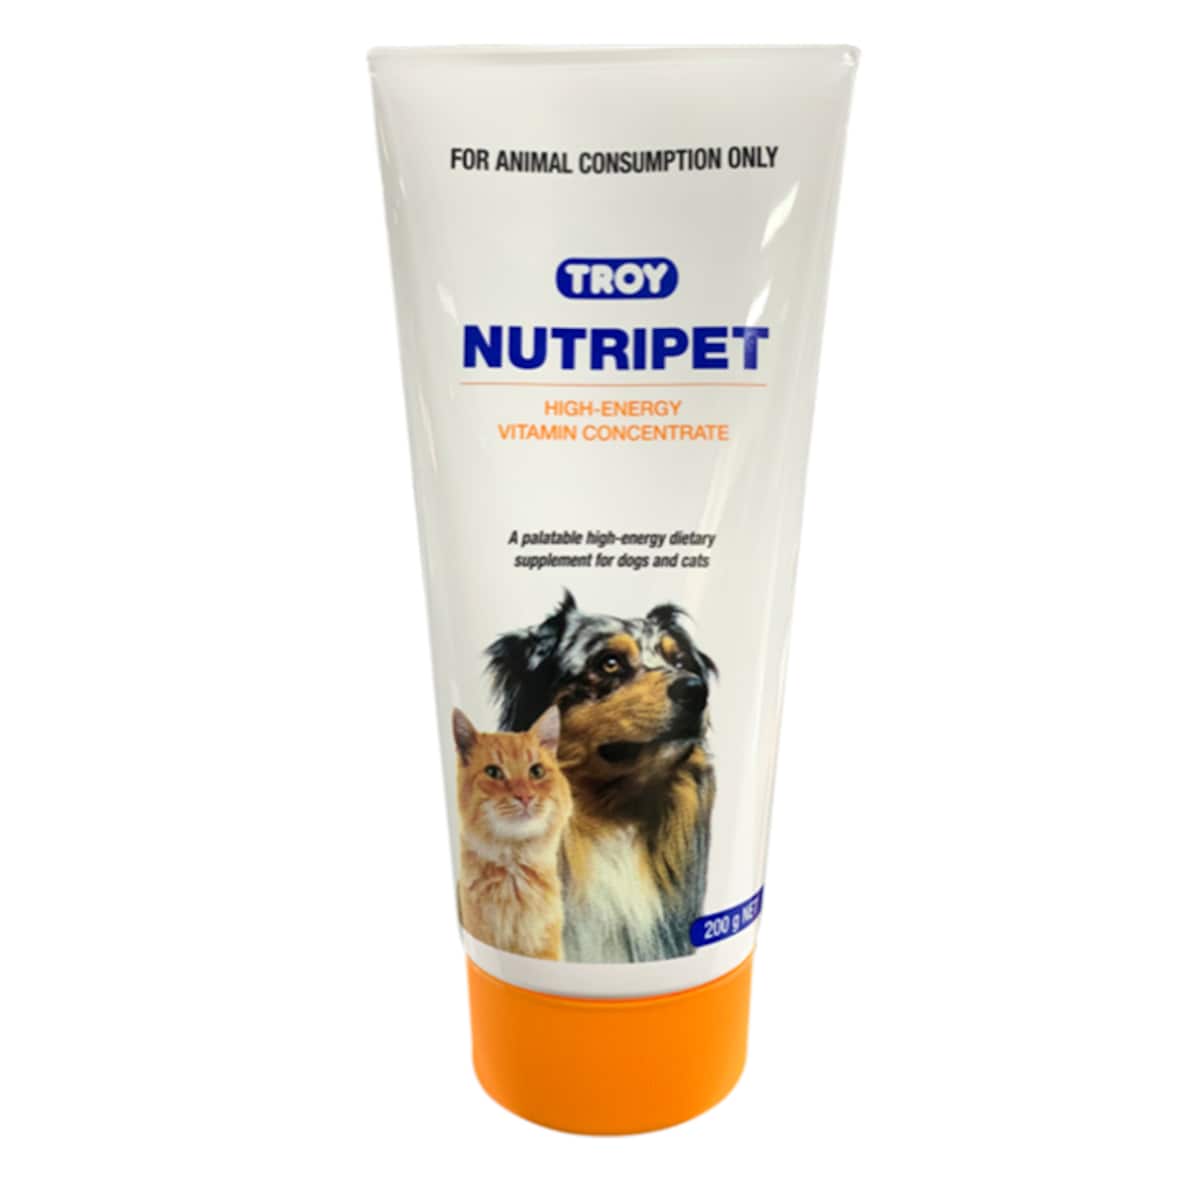 Troy Nutripet High-Energy Vitamin Concentrate for Cats & Dogs 200g